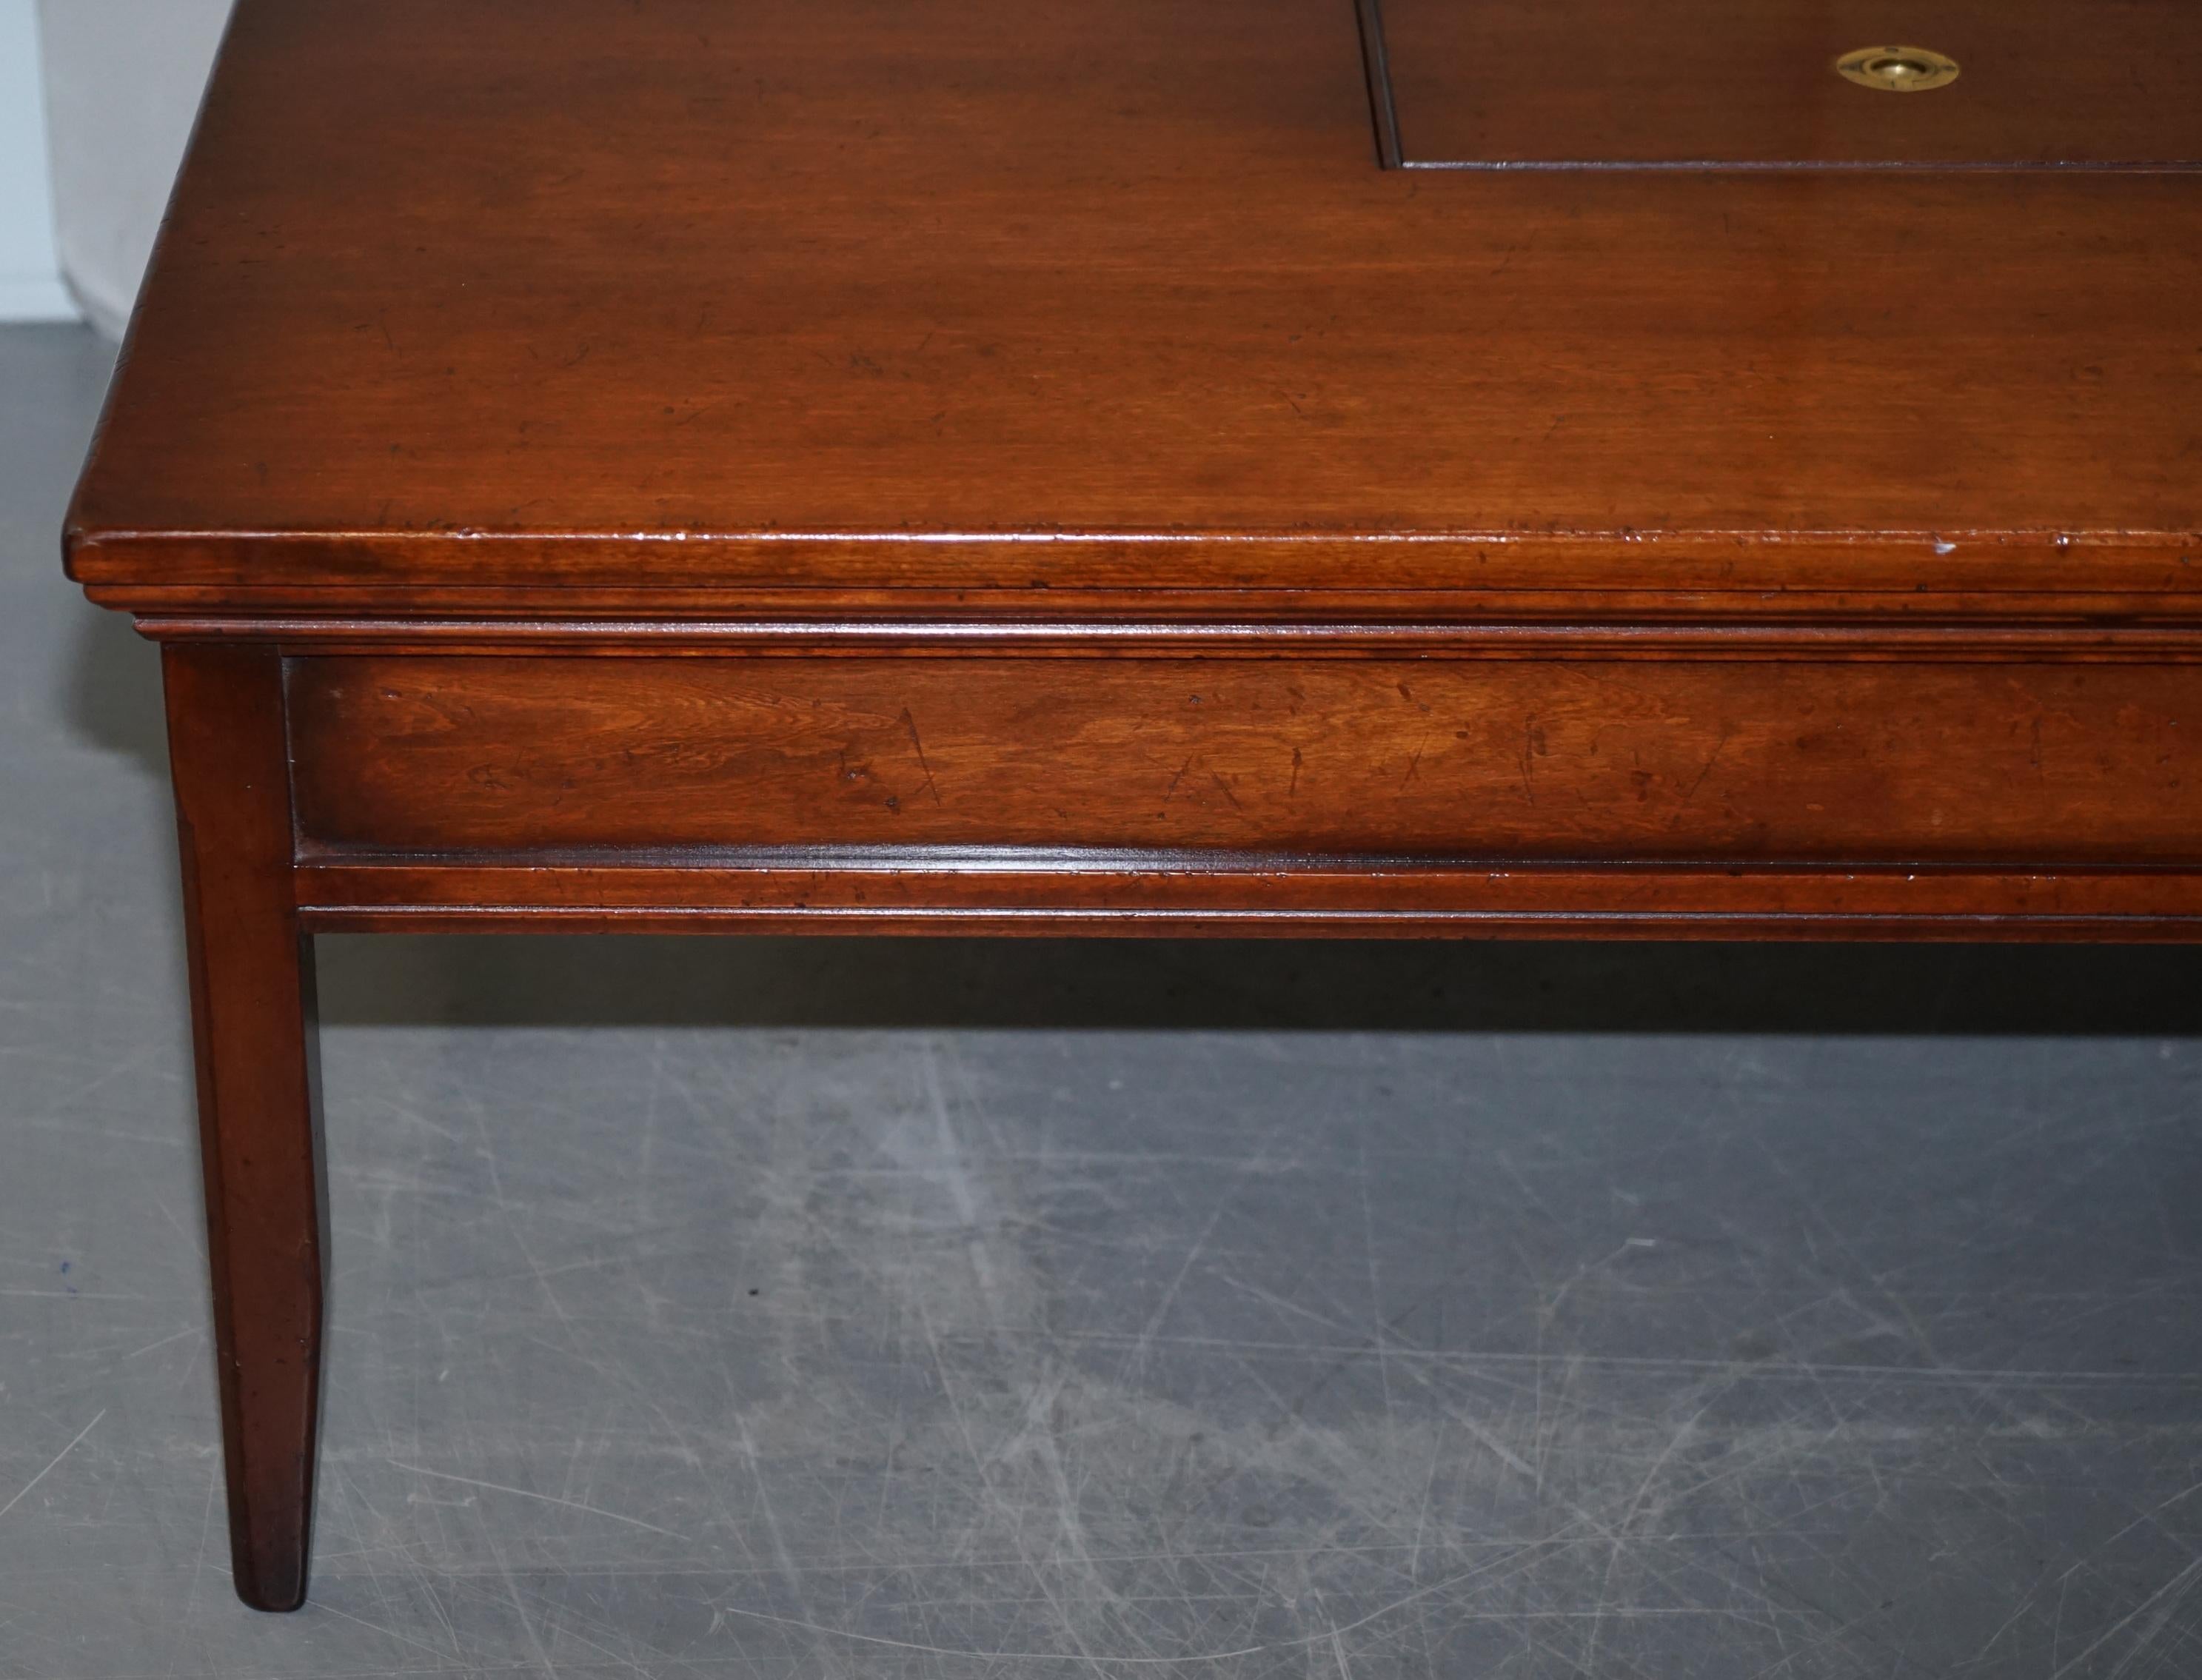 Hand-Crafted 1 of 2 Hardwood Harrods Kennedy Military Campaign Coffee Table Internal Storage